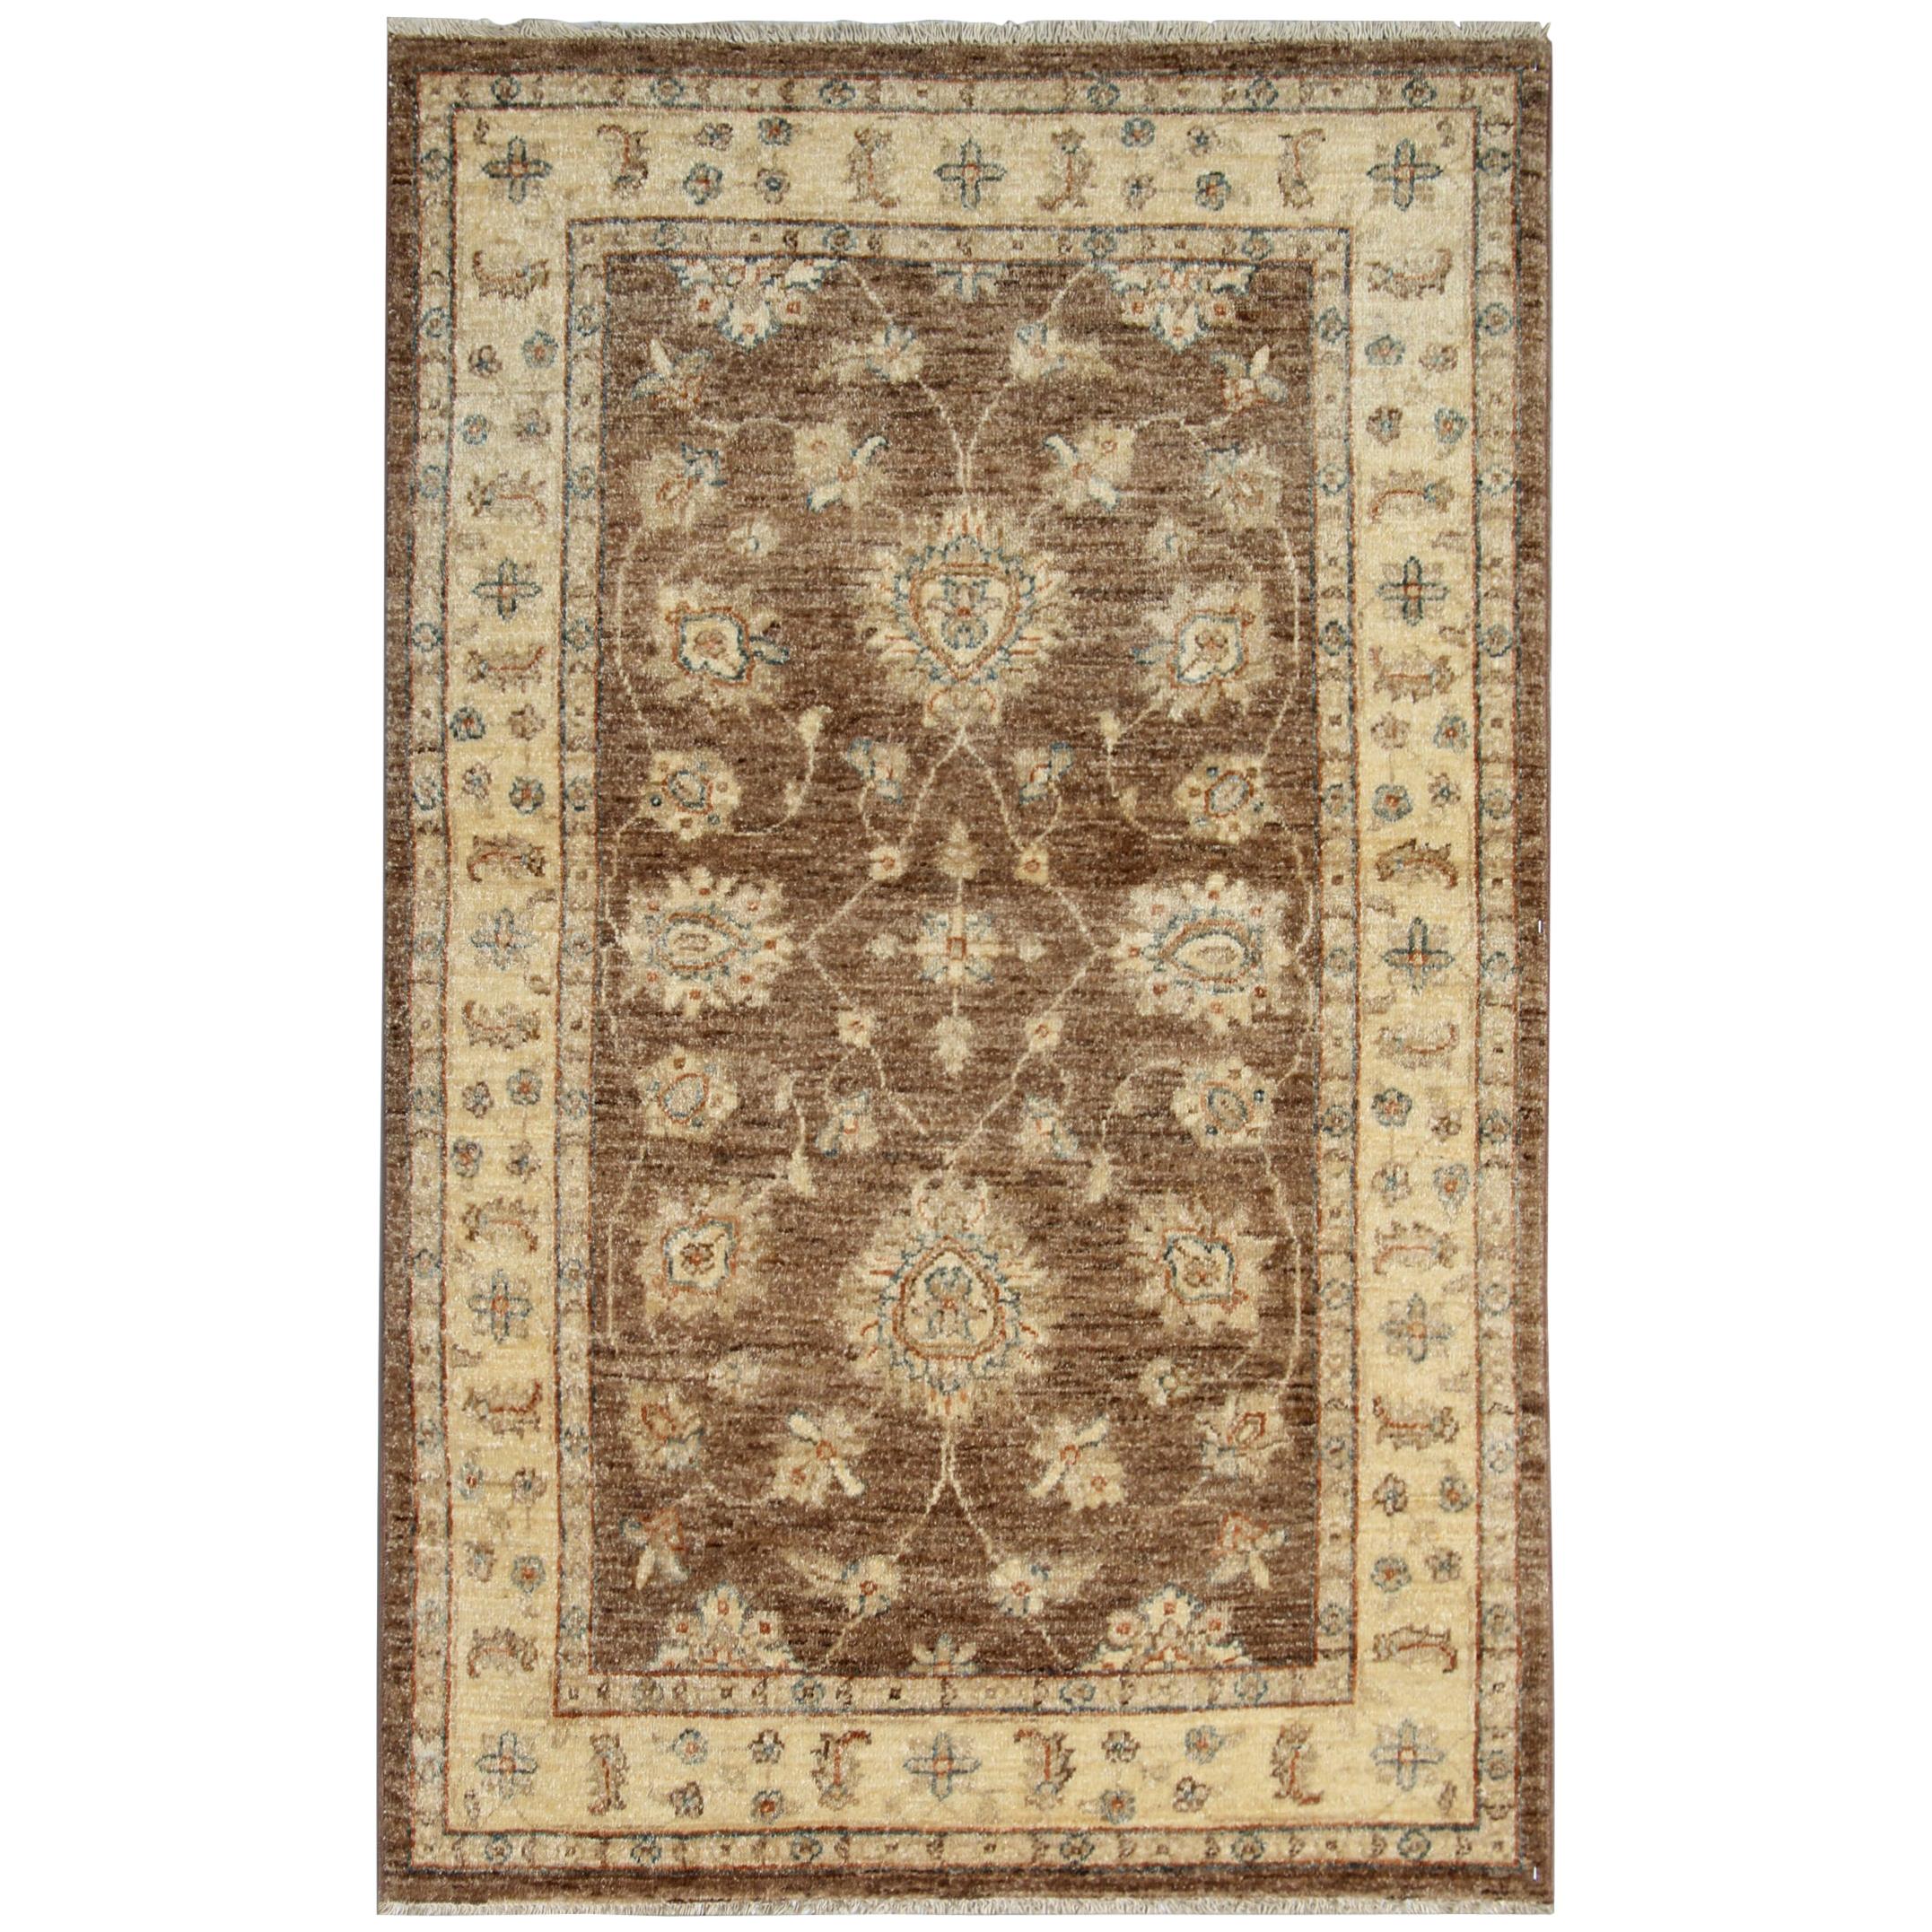 Brown Hand Made Carpet Living Room Rugs, Wool Oriental Rugs Home Decor For Sale